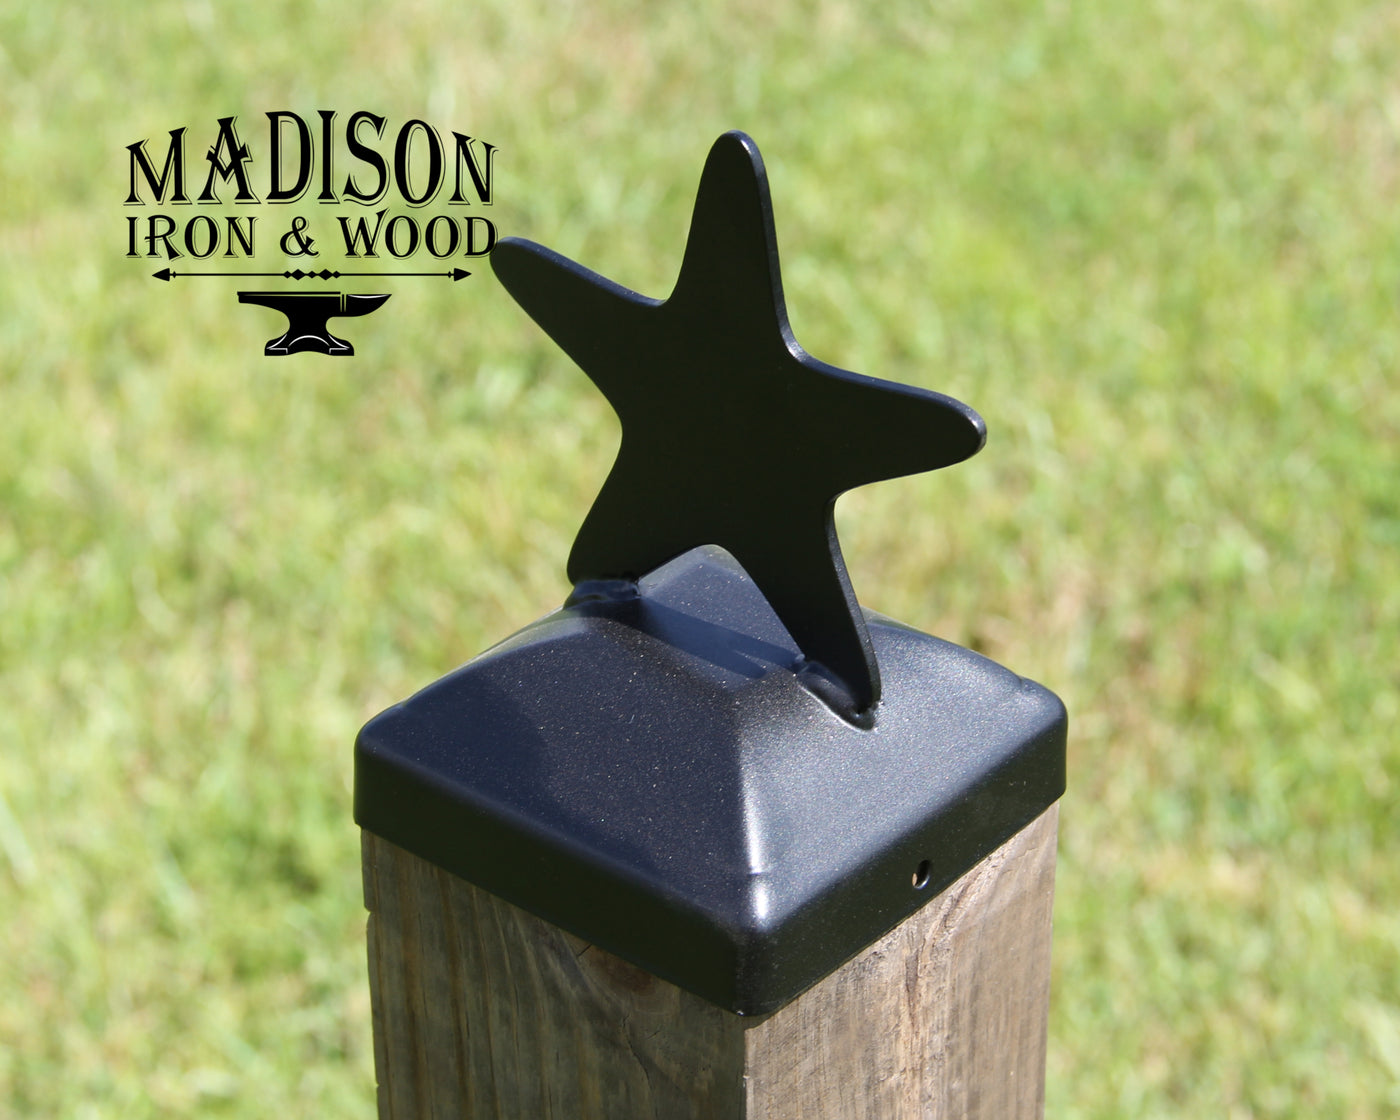 4x4 Starfish Post Cap - Madison Iron and Wood - Post Cap - metal outdoor decor - Steel deocrations - american made products - veteran owned business products - fencing decorations - fencing supplies - custom wall decorations - personalized wall signs - steel - decorative post caps - steel post caps - metal post caps - brackets - structural brackets - home improvement - easter - easter decorations - easter gift - easter yard decor